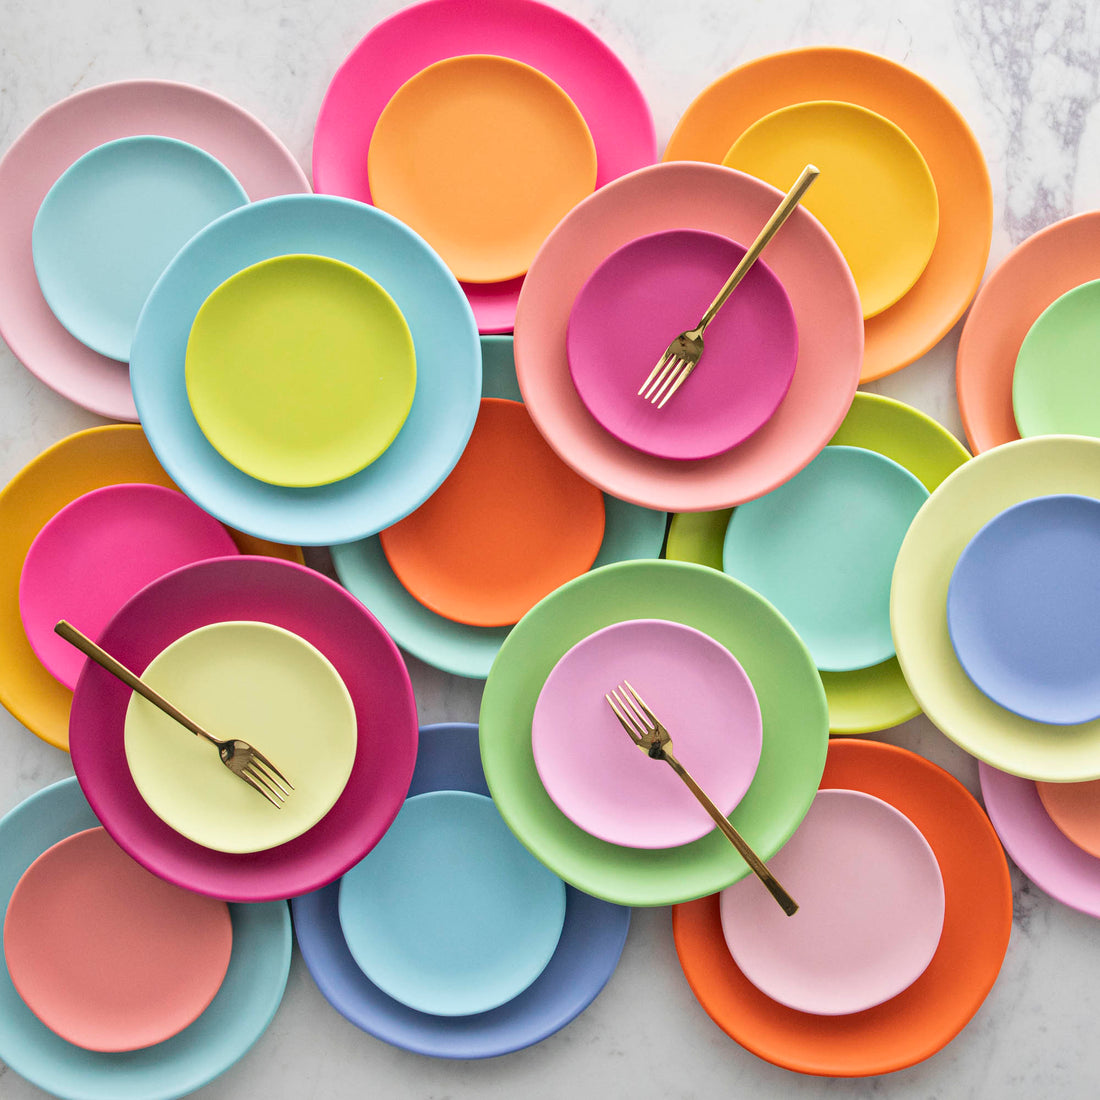 Colorful plates and forks arranged on a marble table.